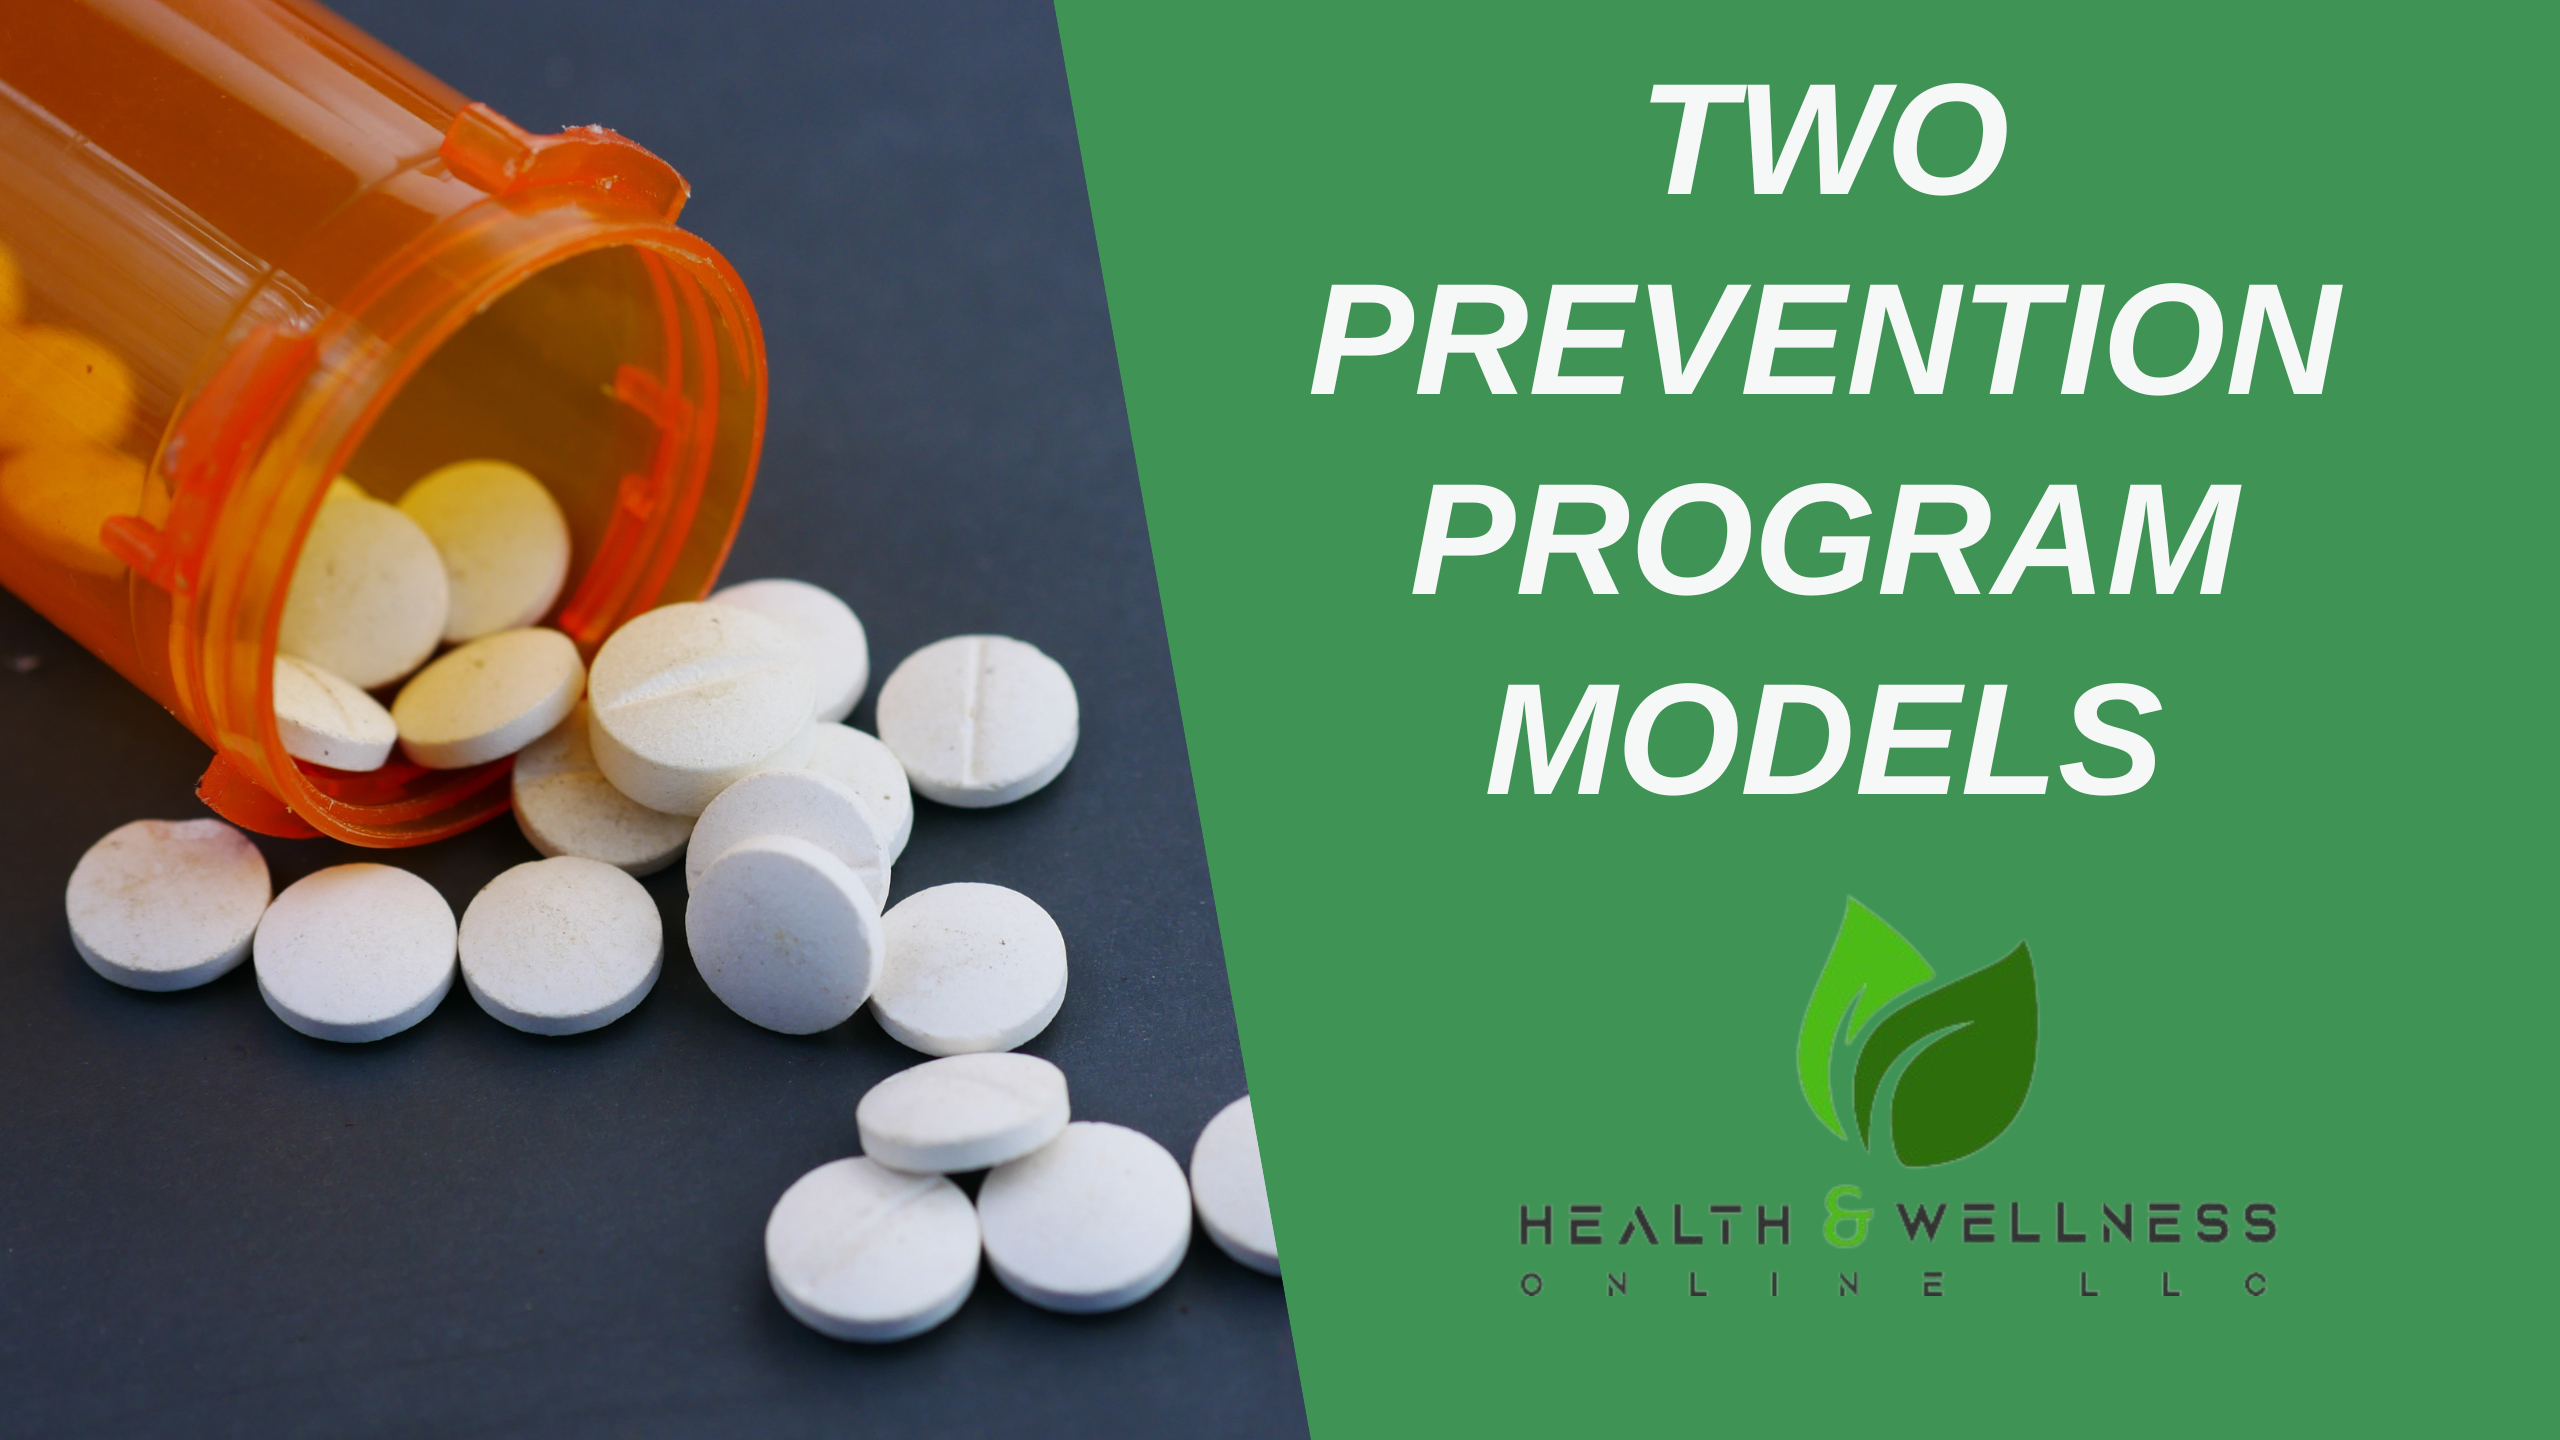 Two Prevention Program Models is a 3 CE CH Course on Health and Wellness Online.